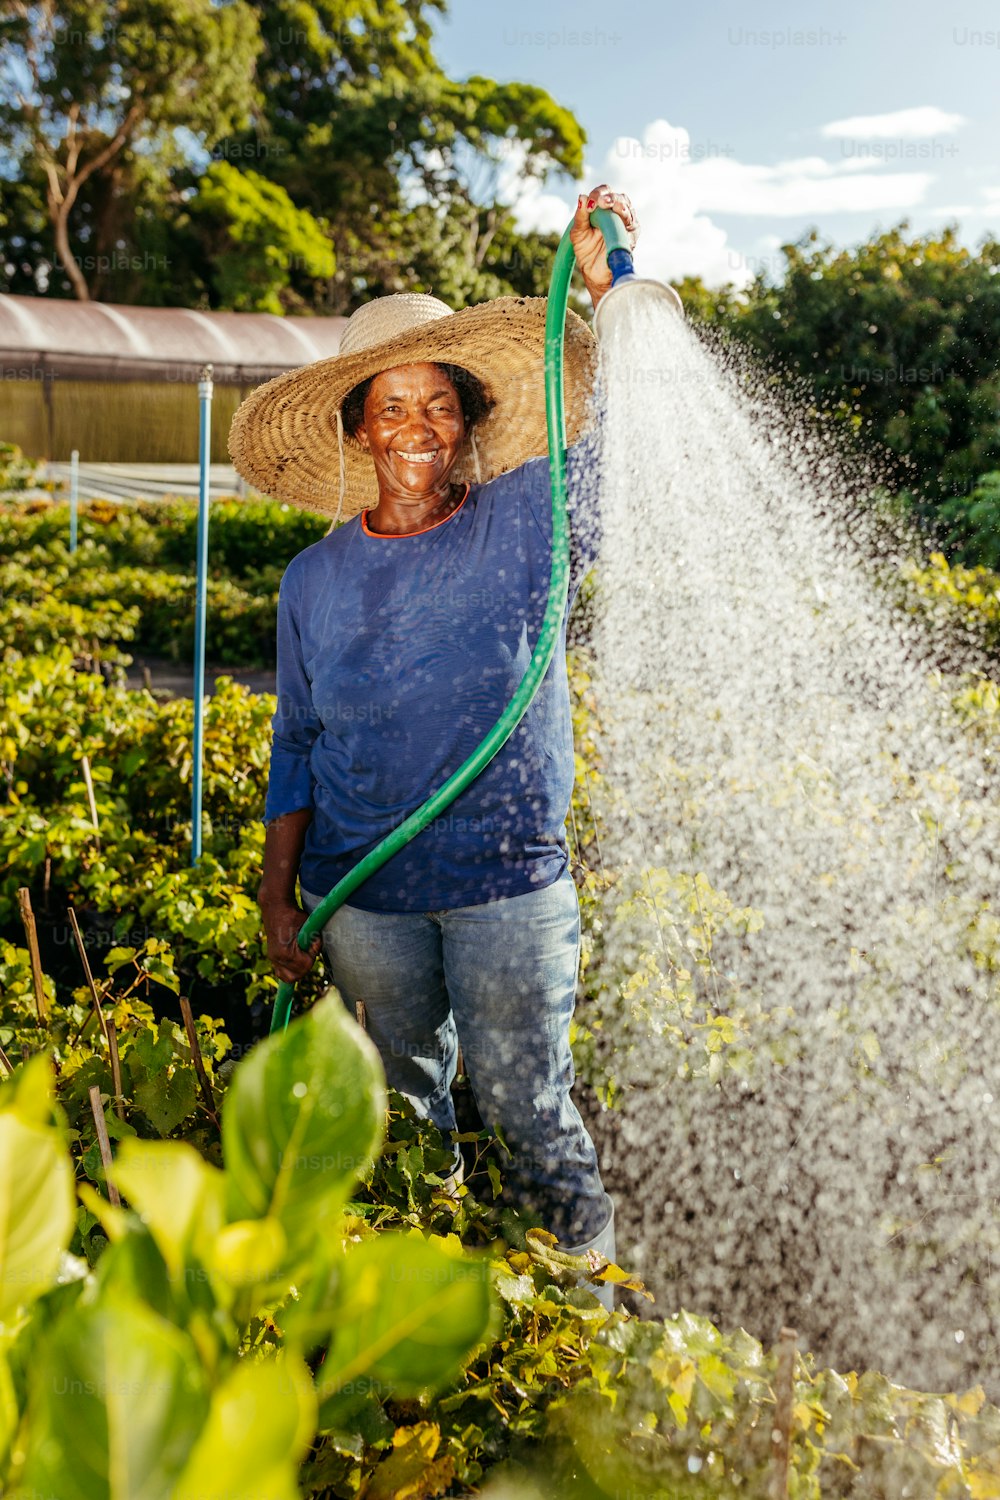 a man in a straw hat holding a hose and spraying water